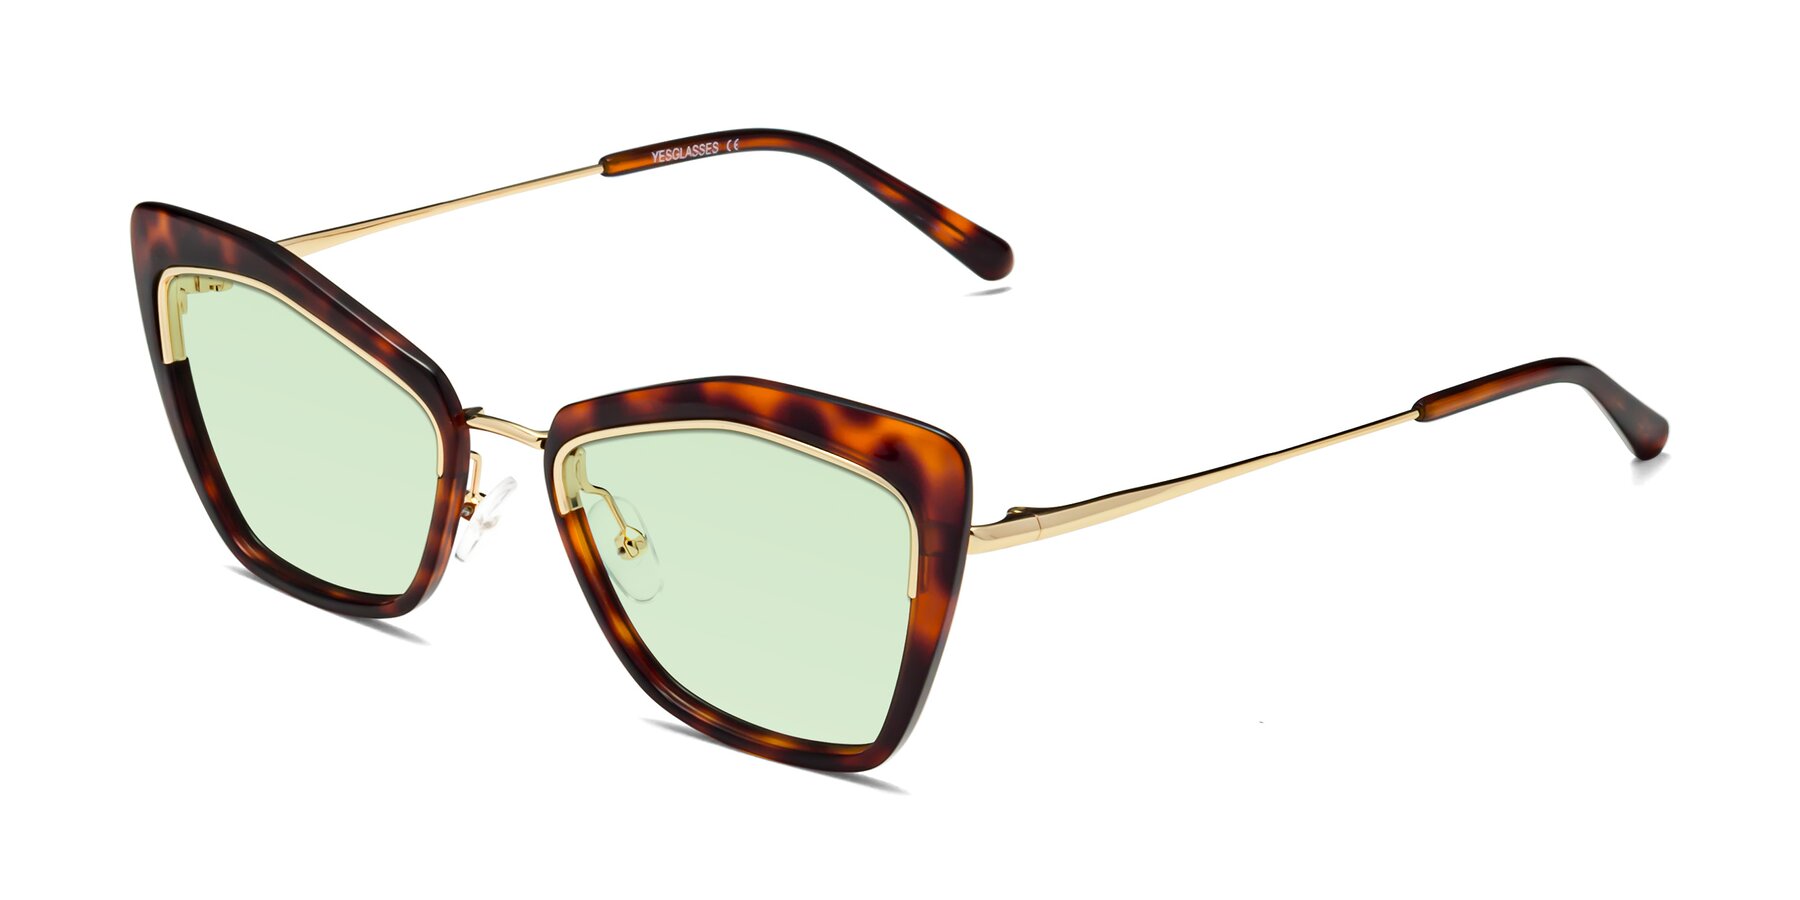 Angle of Lasso in Light Tortoise with Light Green Tinted Lenses